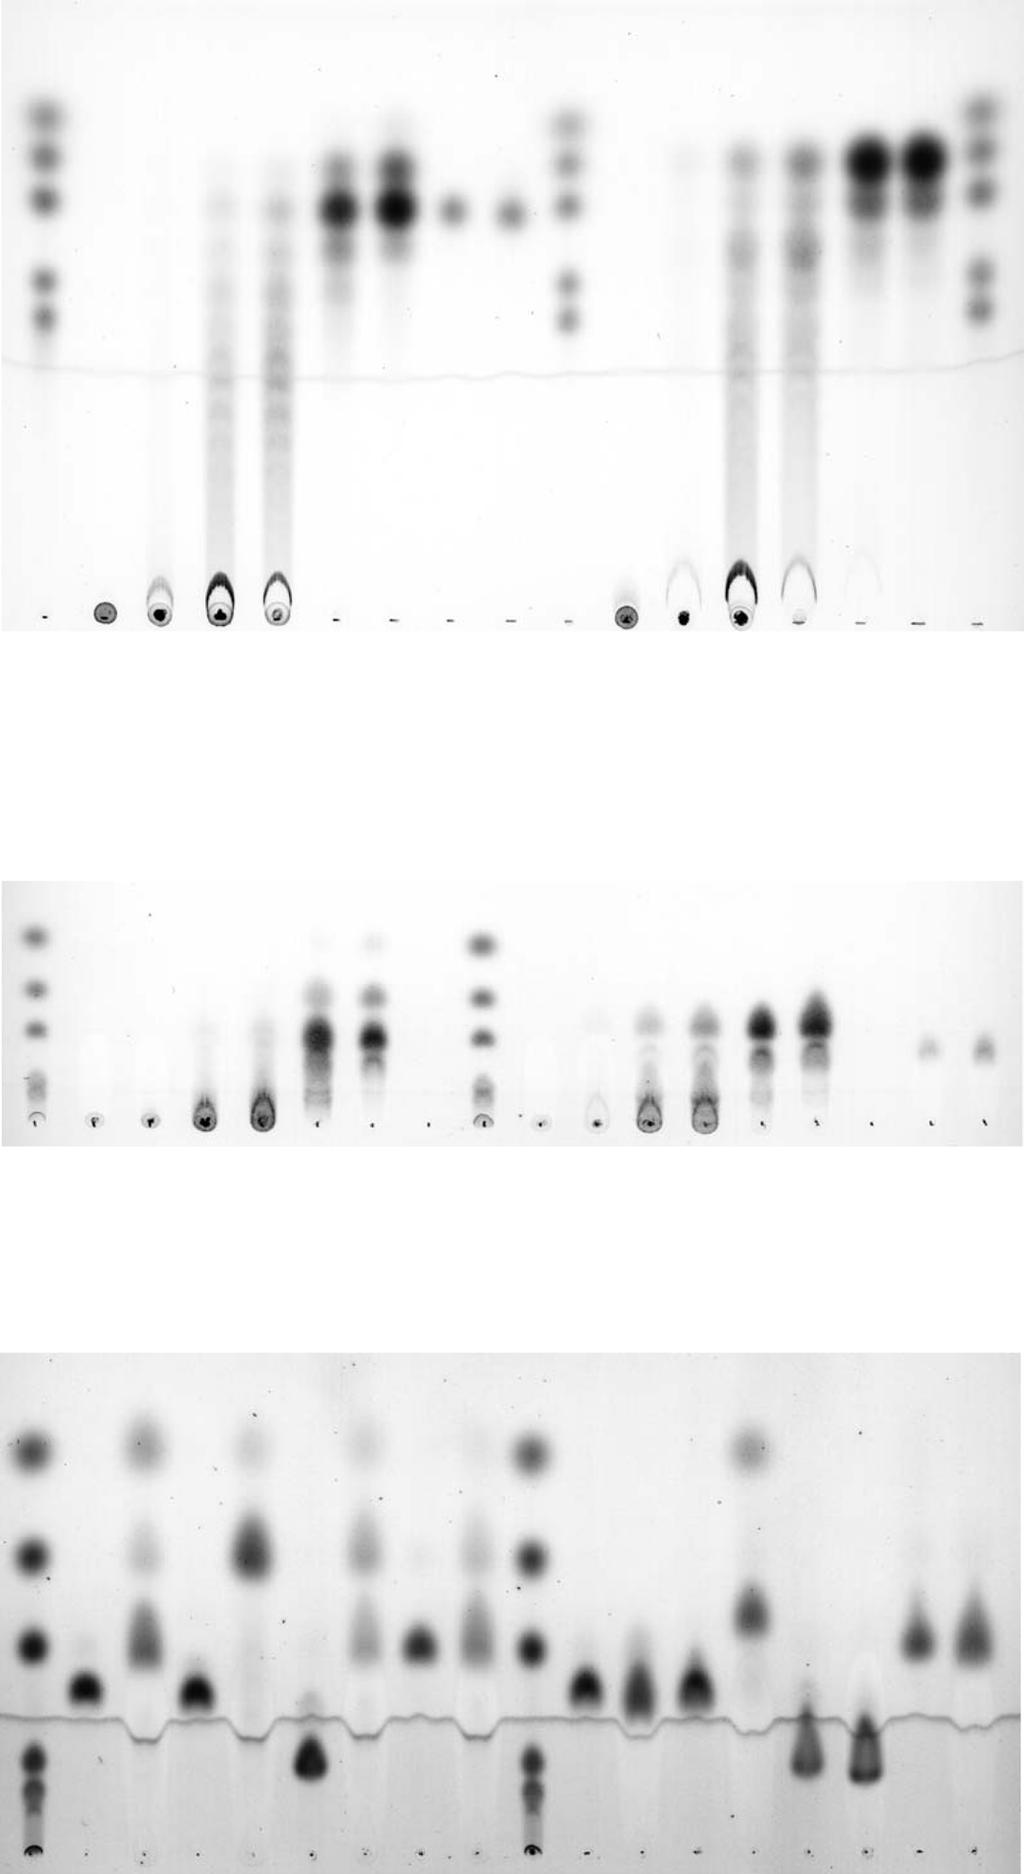 www.nature.com/scientificreports/ Figure 5. Thin layer chromatography analysis of barley β-glucan and oligosaccharide degradation products by purified EngU and Clostridium thermocellum LicB.